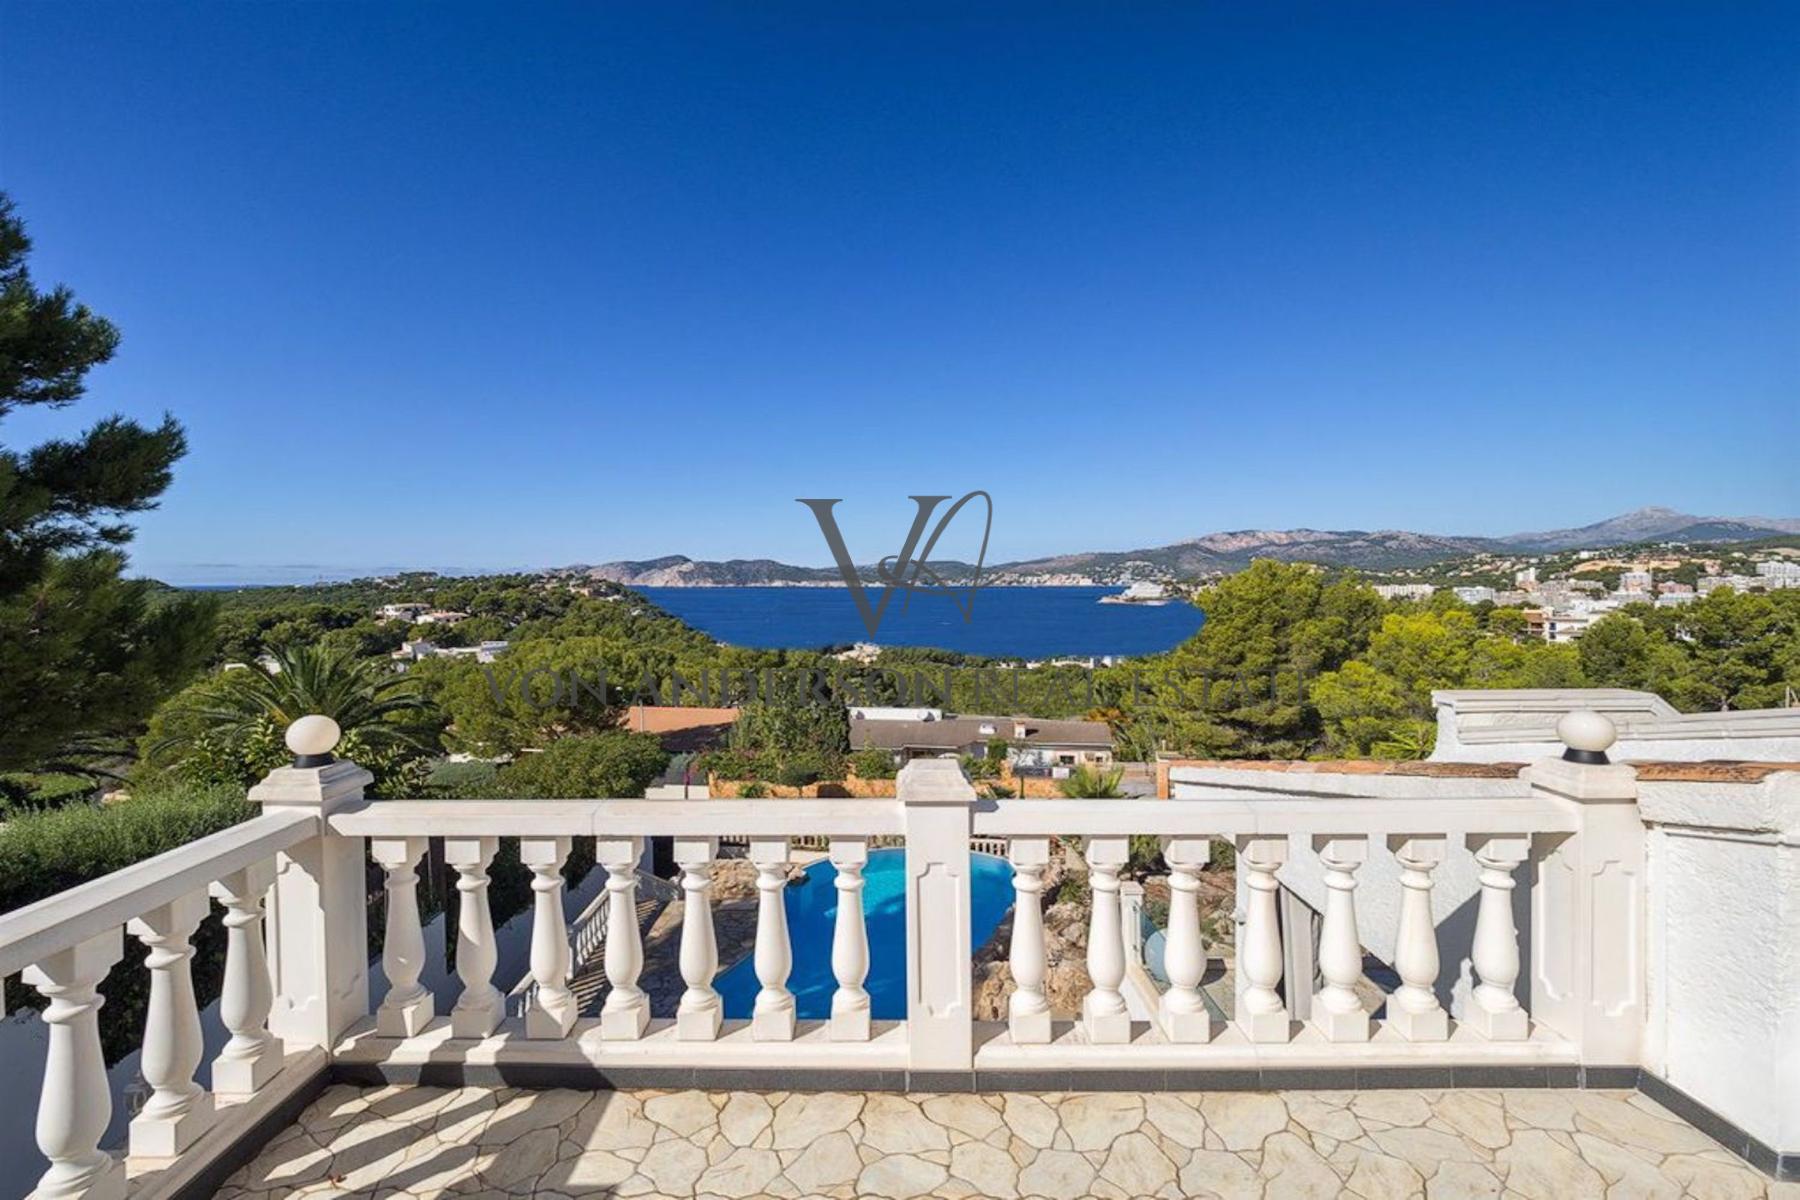 A Four Bedroom Home with Ocean Views in Close Proximity to the Beach, ref. VA1014, for sale in Mallorca by Von Anderson Real Estate